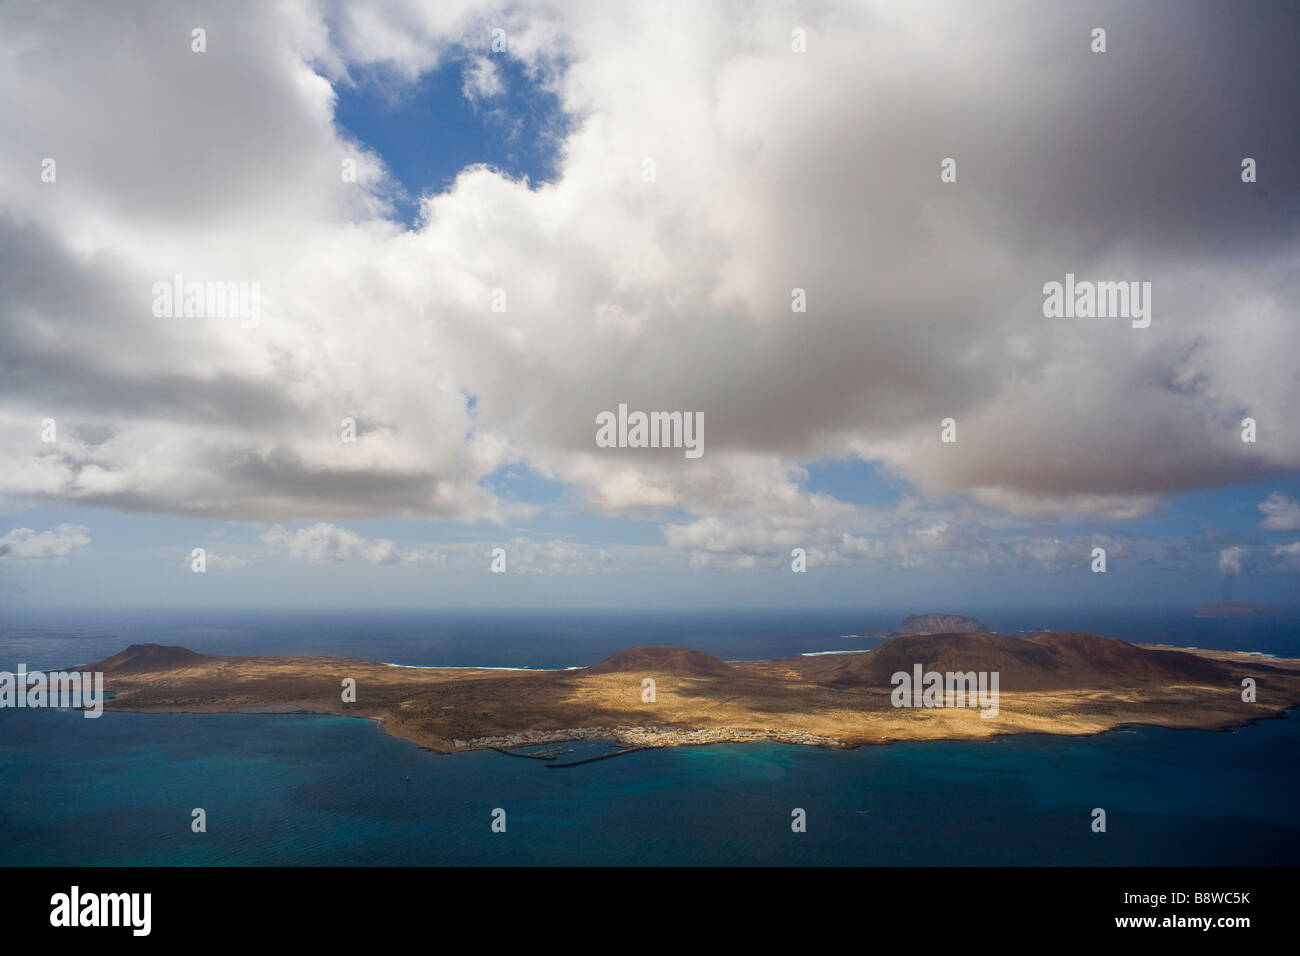 Heavy clouds on Isla Graciosa, a small island at the north of Lanzarote, Canary Islands, Spain. Stock Photo